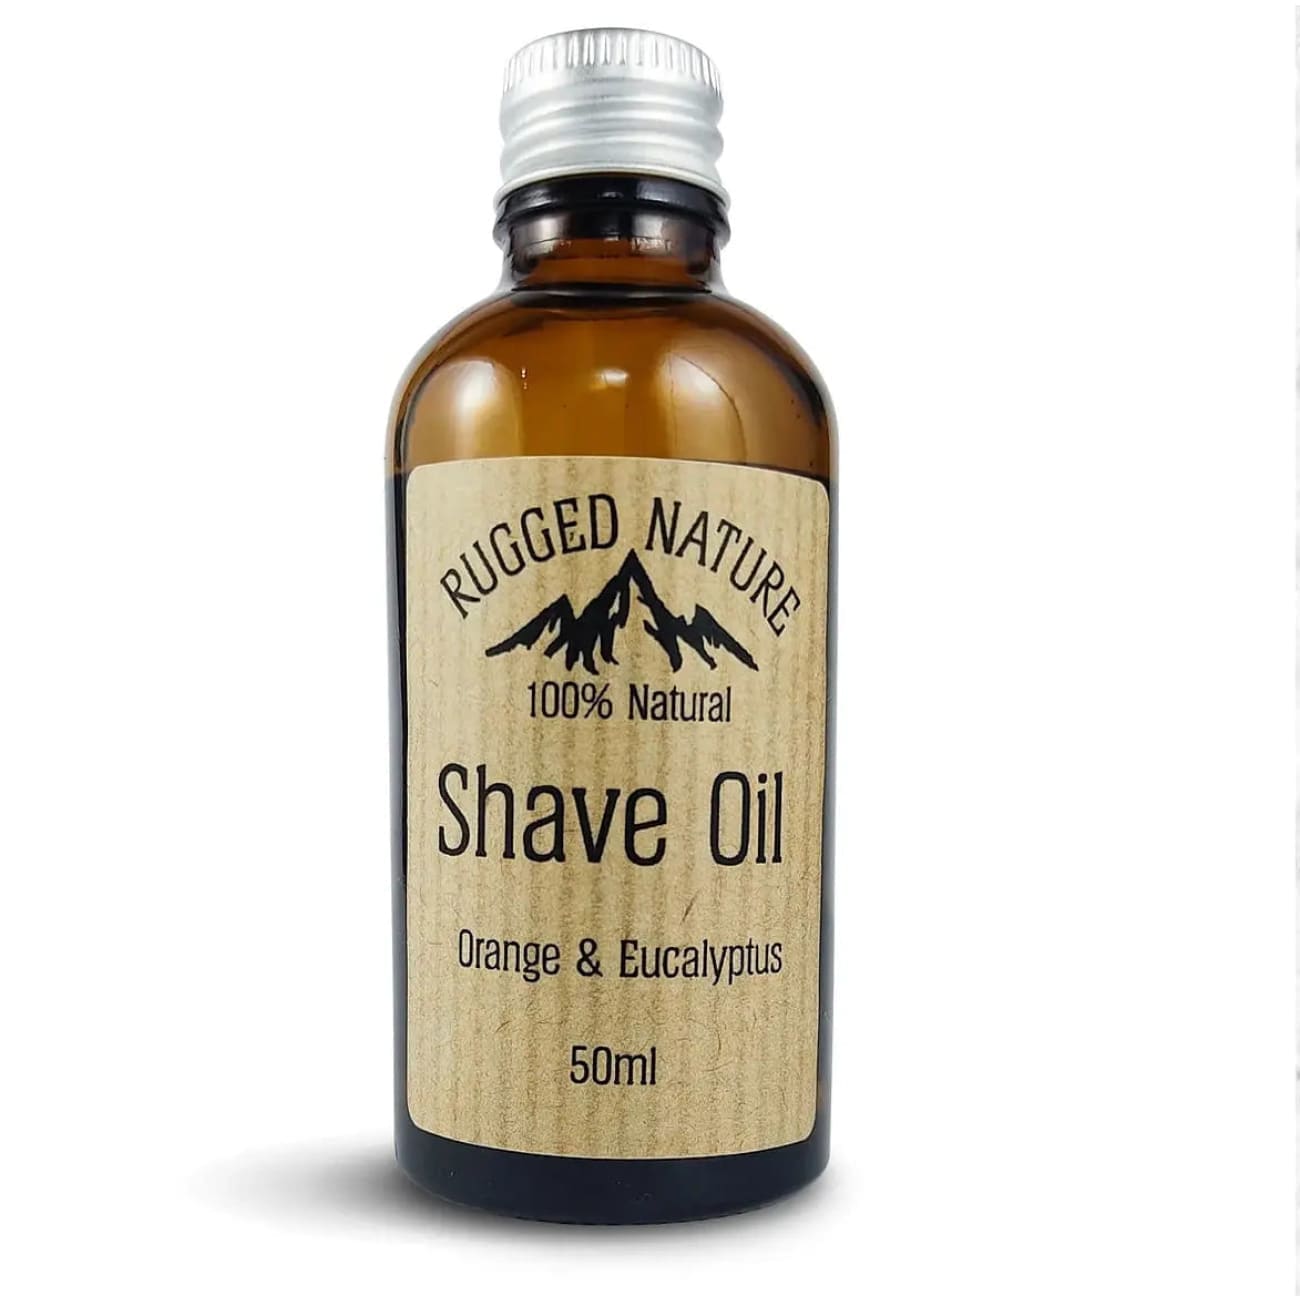 RUGGED NATURE 100% NATURAL SHAVE OIL, ORANGE AND EUCALYPTUS - 50ML Rock Chocs 